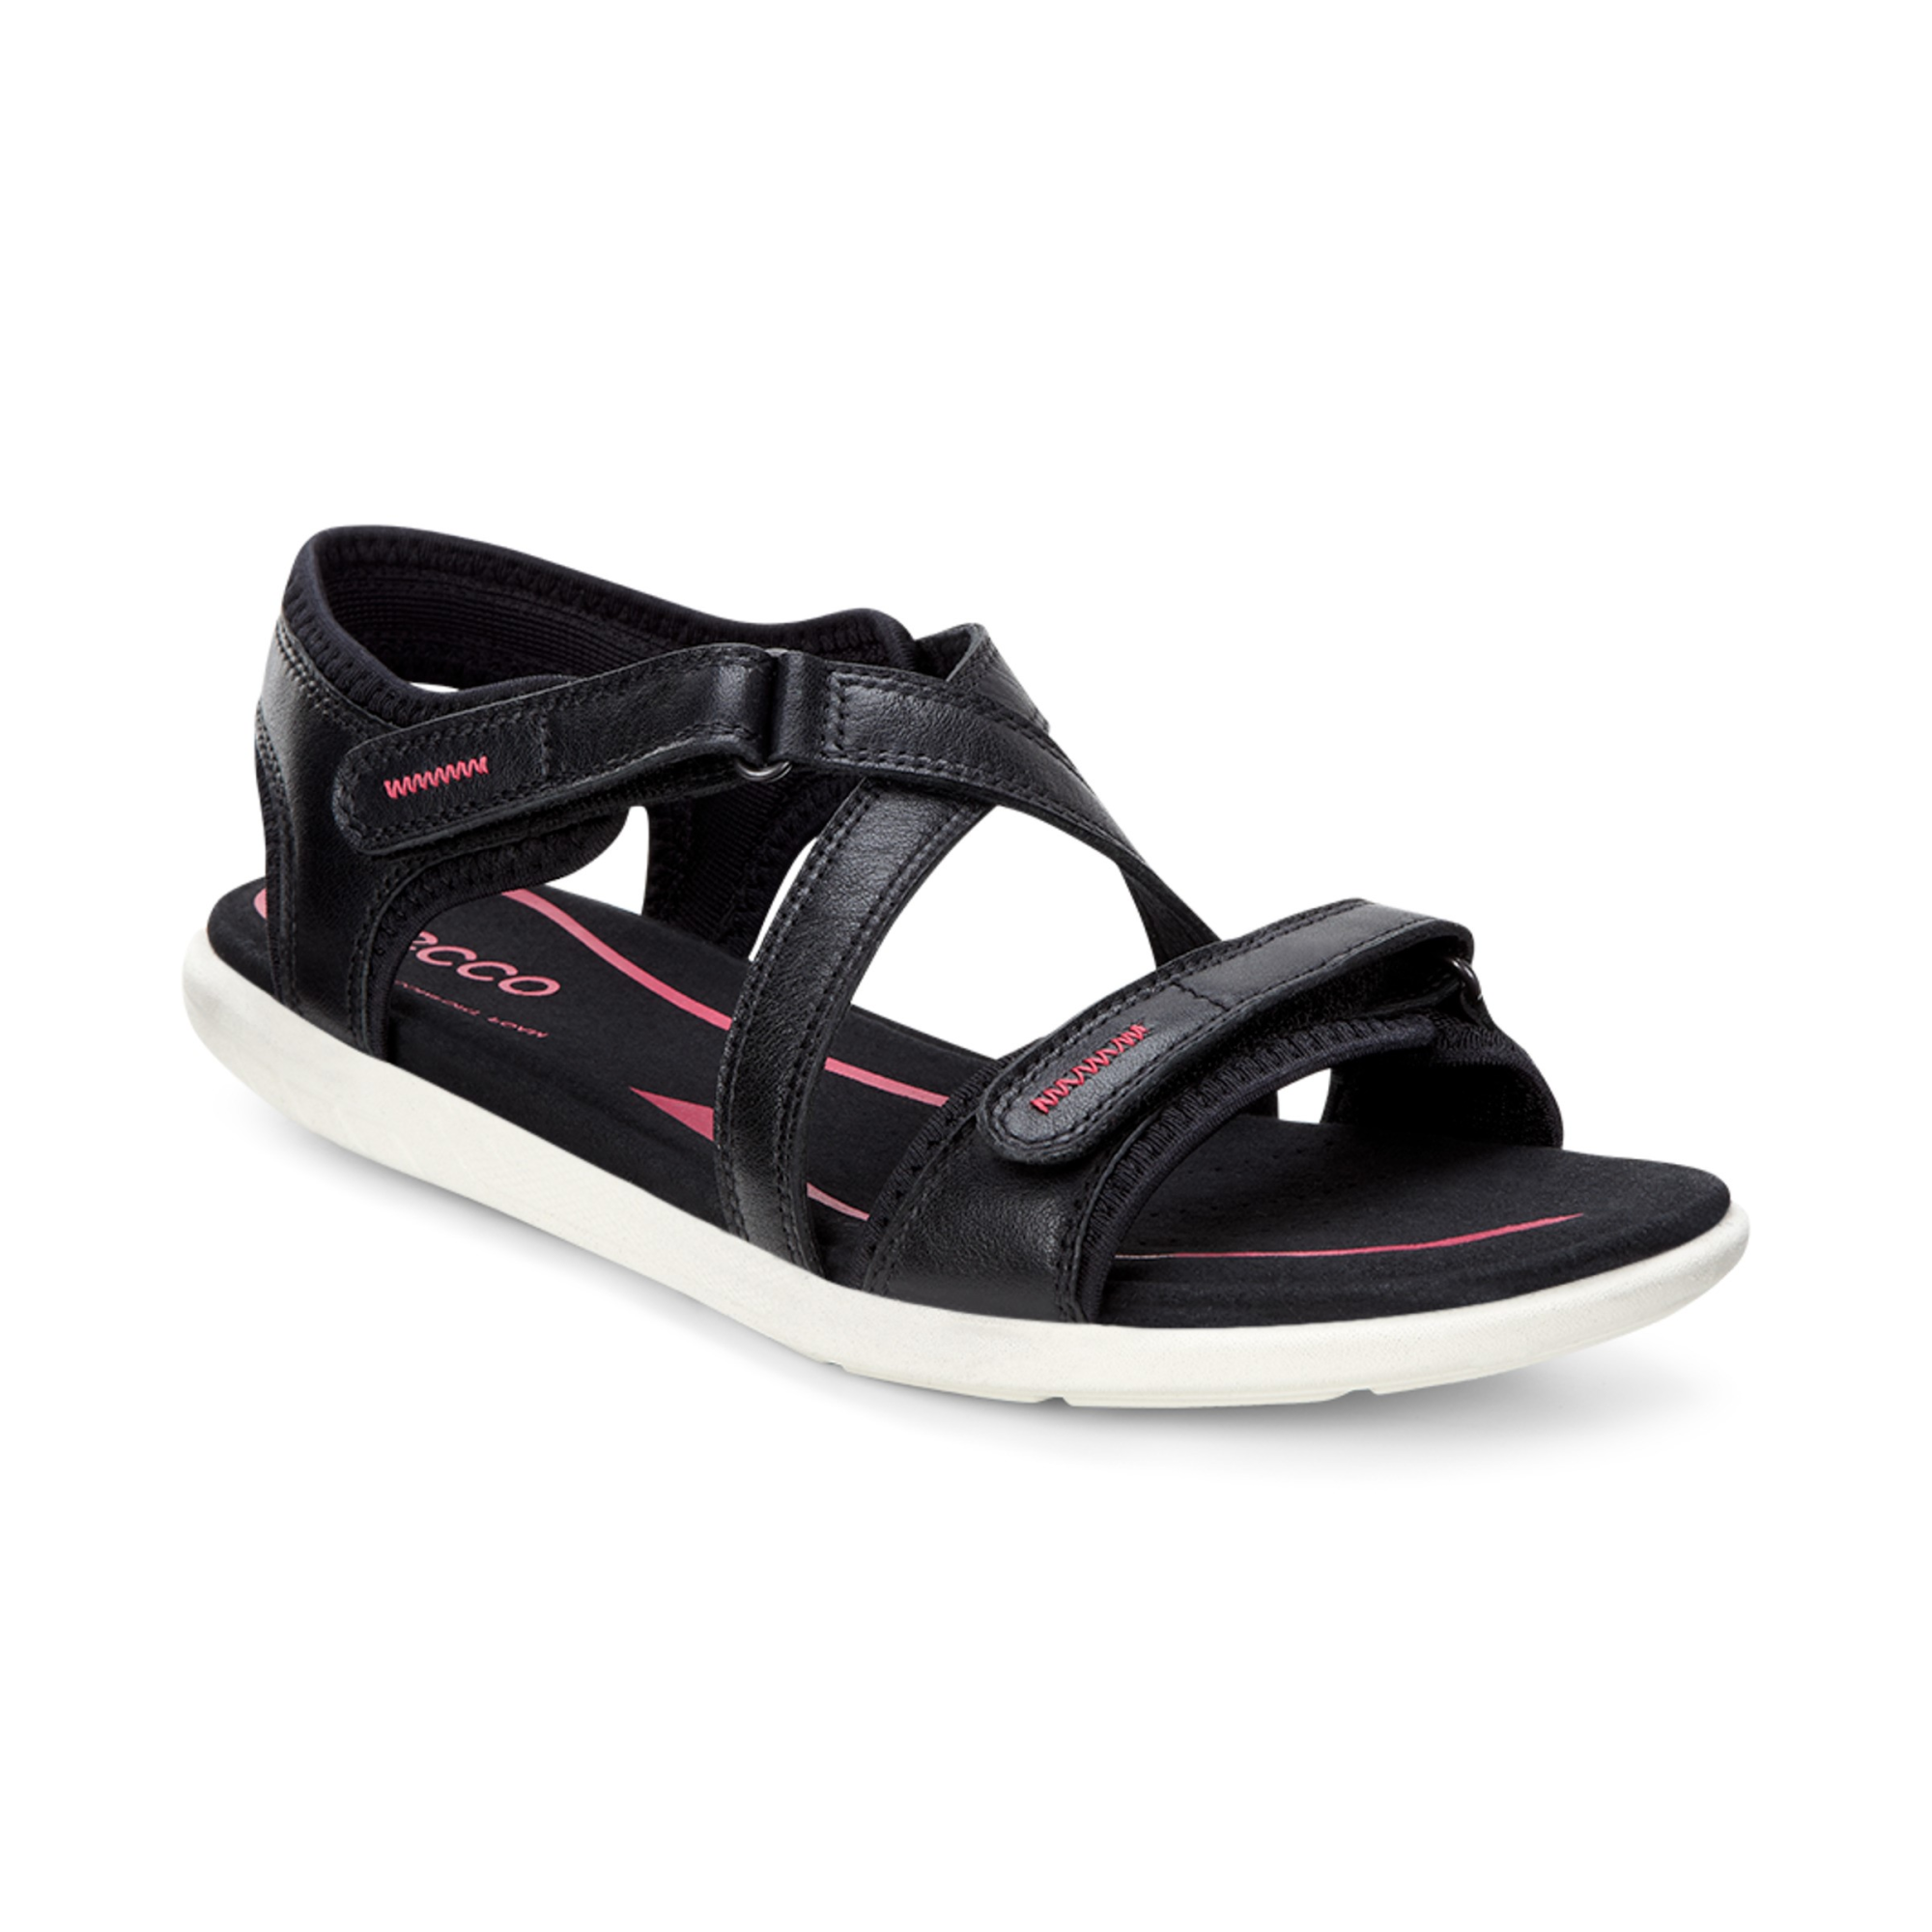 Dwelling I smal Ecco BLUMA SANDAL Flat Sandal 41 - Products - Veryk Mall - Veryk Mall, many  product, quick response, safe your money!